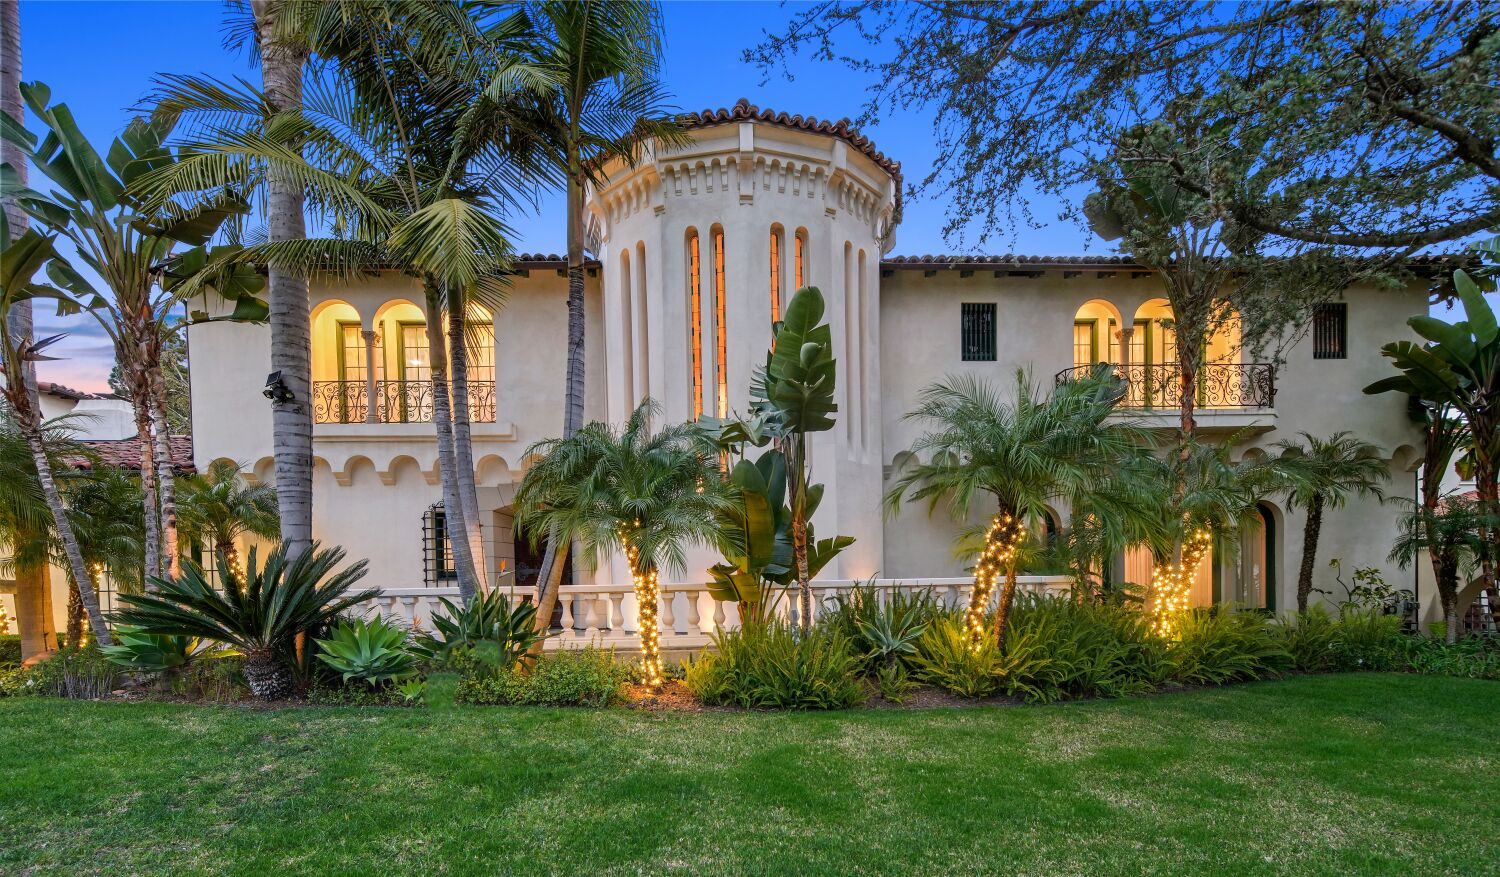 Bugsy Siegel was killed in this Beverly Hills mansion. For $17 million, it can be yours